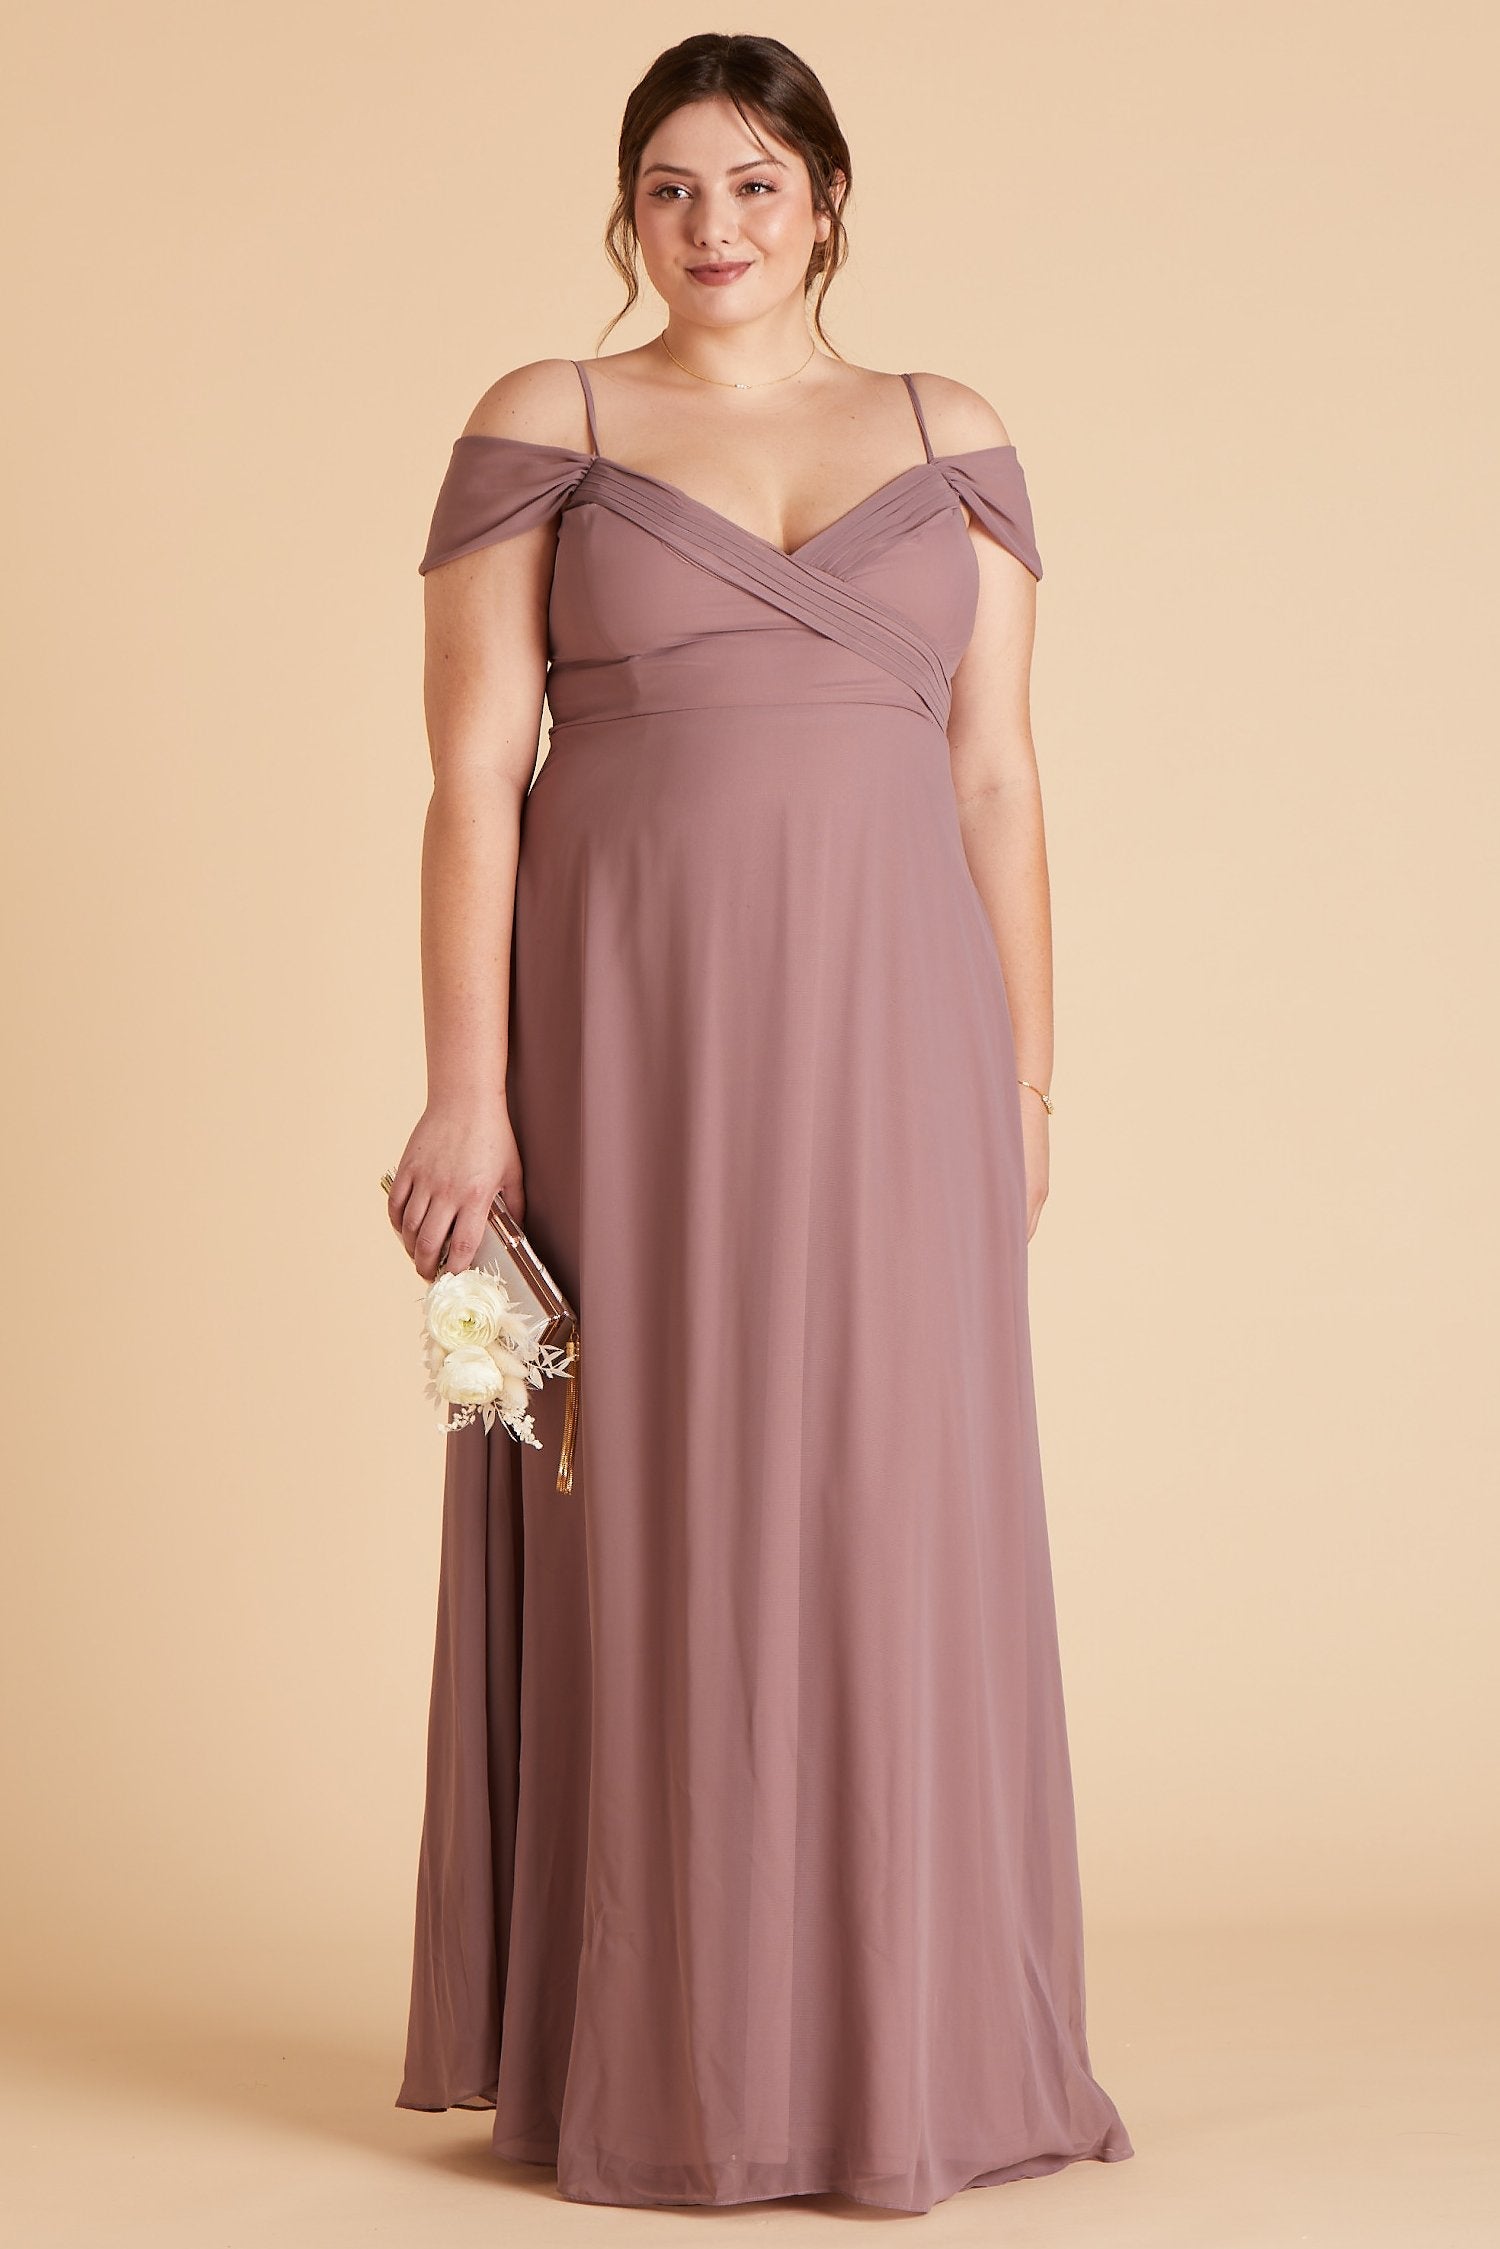 Spence convertible plus size bridesmaid dress in dark mauve chiffon by Birdy Grey, front view